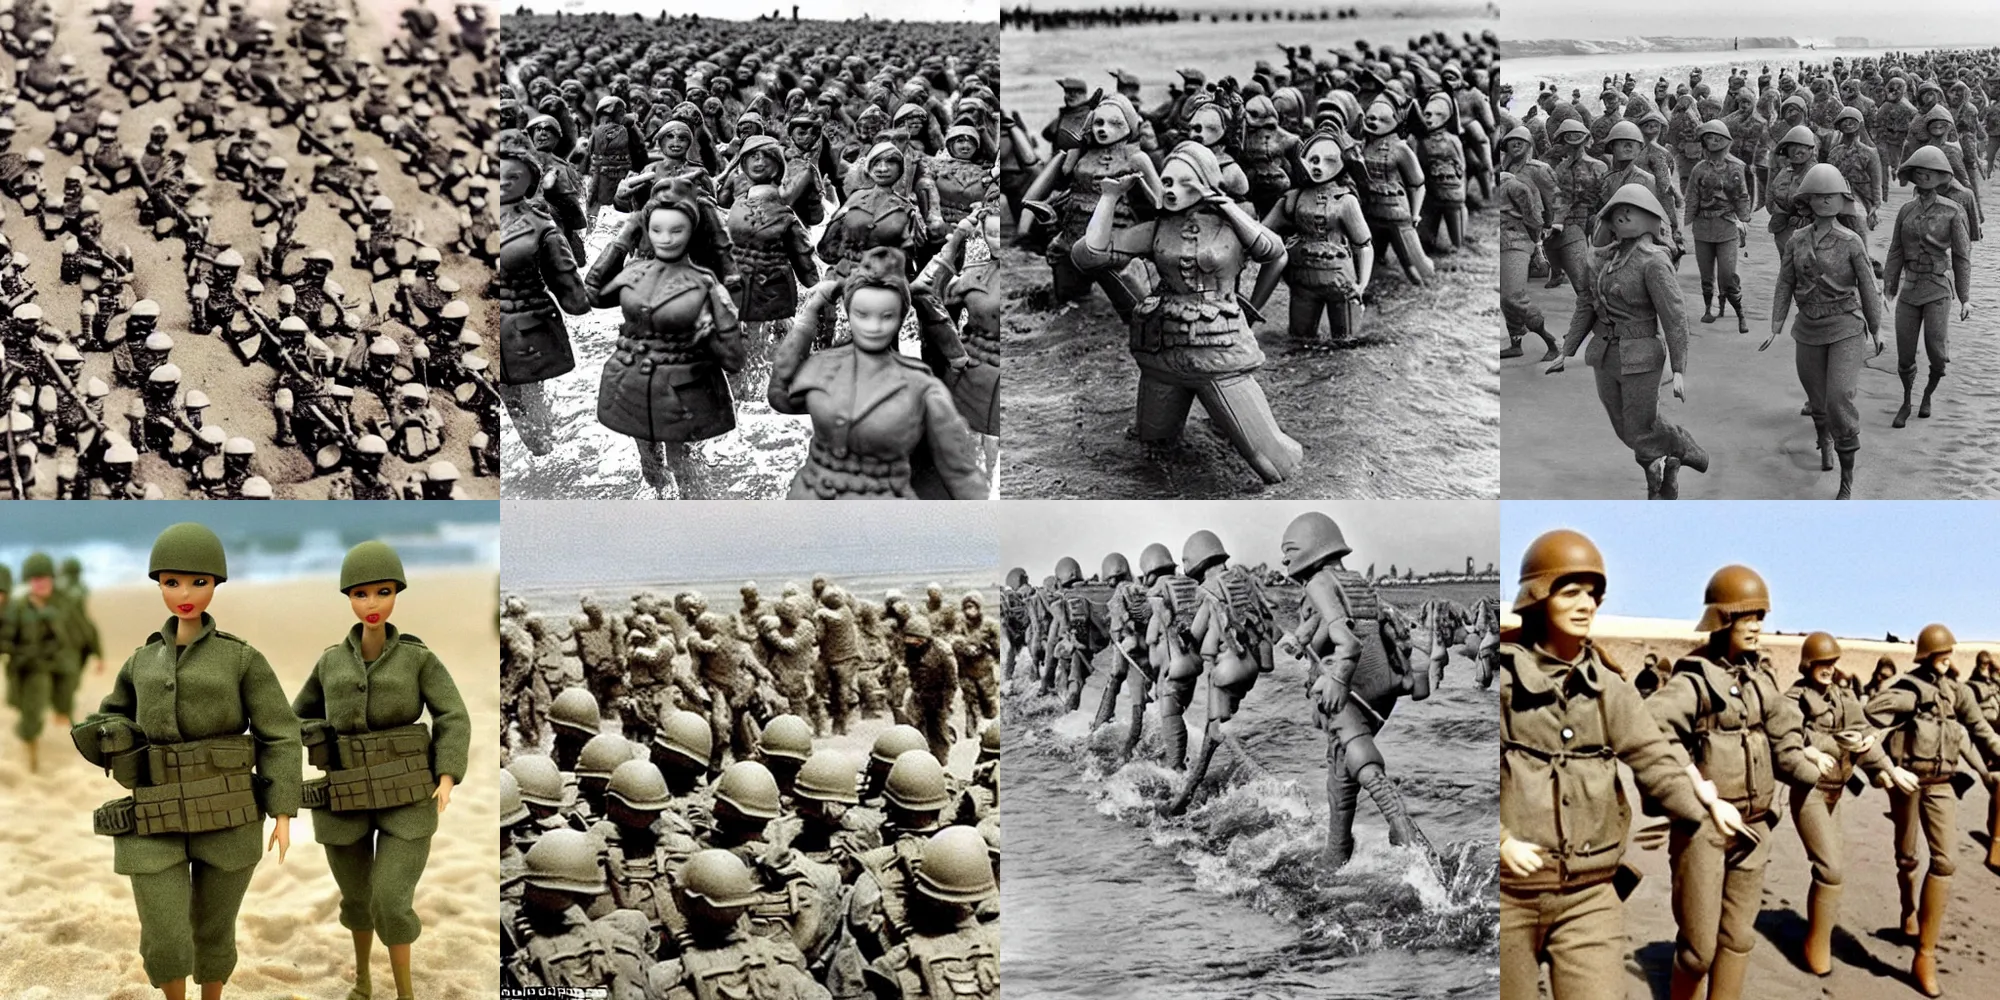 Prompt: 500,000 army barbie dolls storming the beaches of Normandy on D-Day